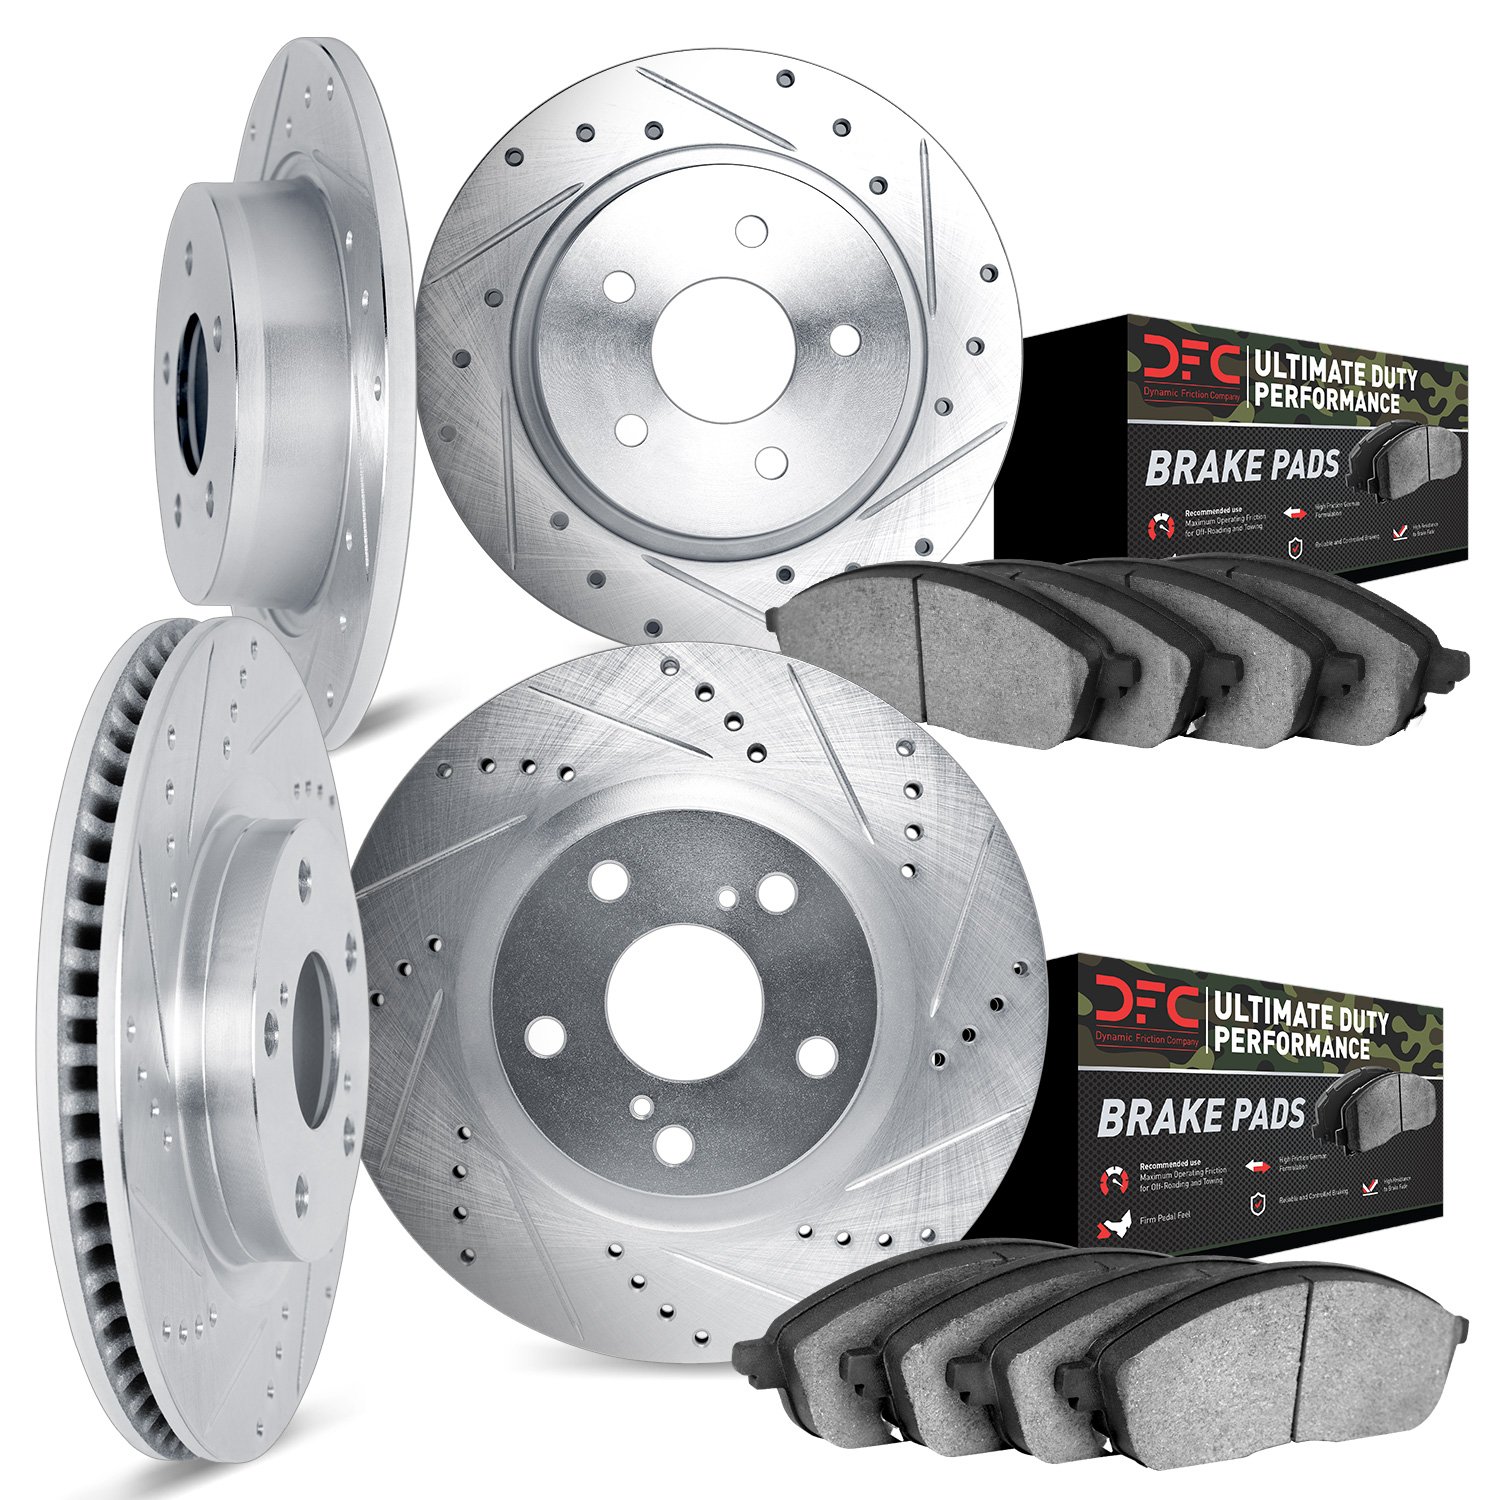 7404-54030 Drilled/Slotted Brake Rotors with Ultimate-Duty Brake Pads Kit [Silver], 2002-2005 Ford/Lincoln/Mercury/Mazda, Positi